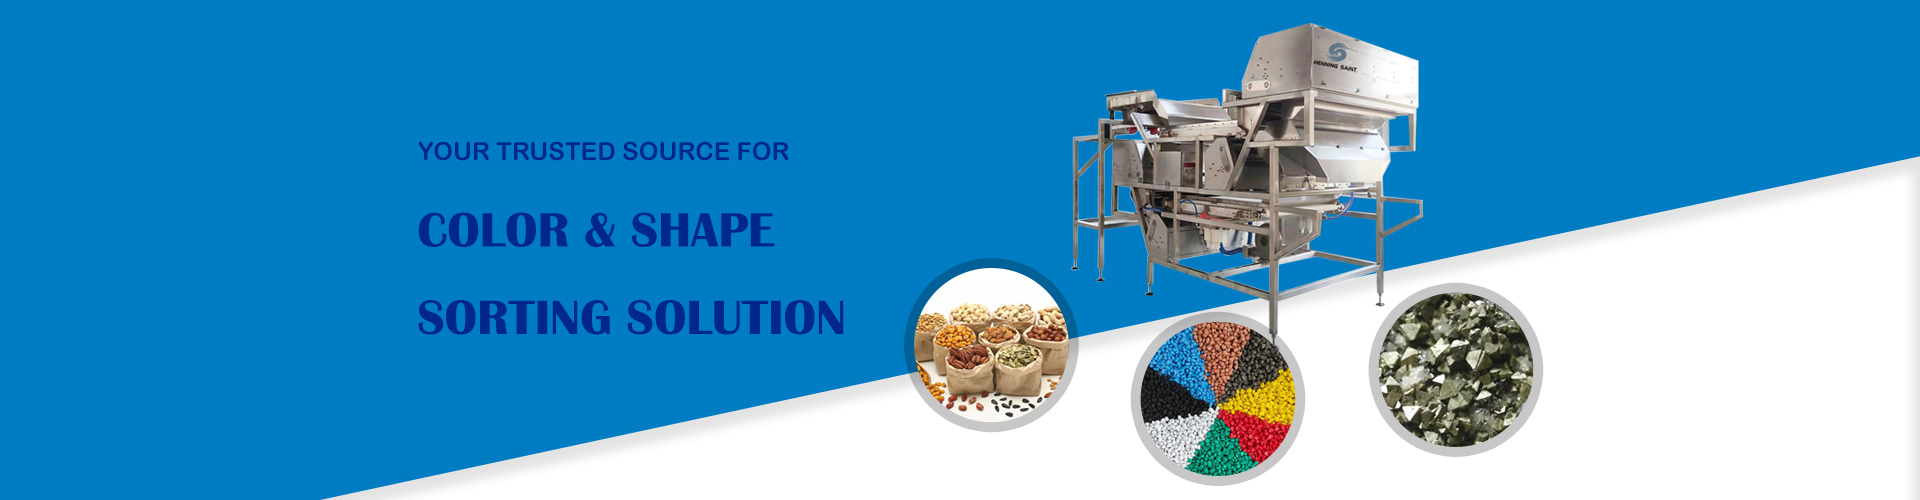 Henning Saint new product: Deep-learning Color Sorter